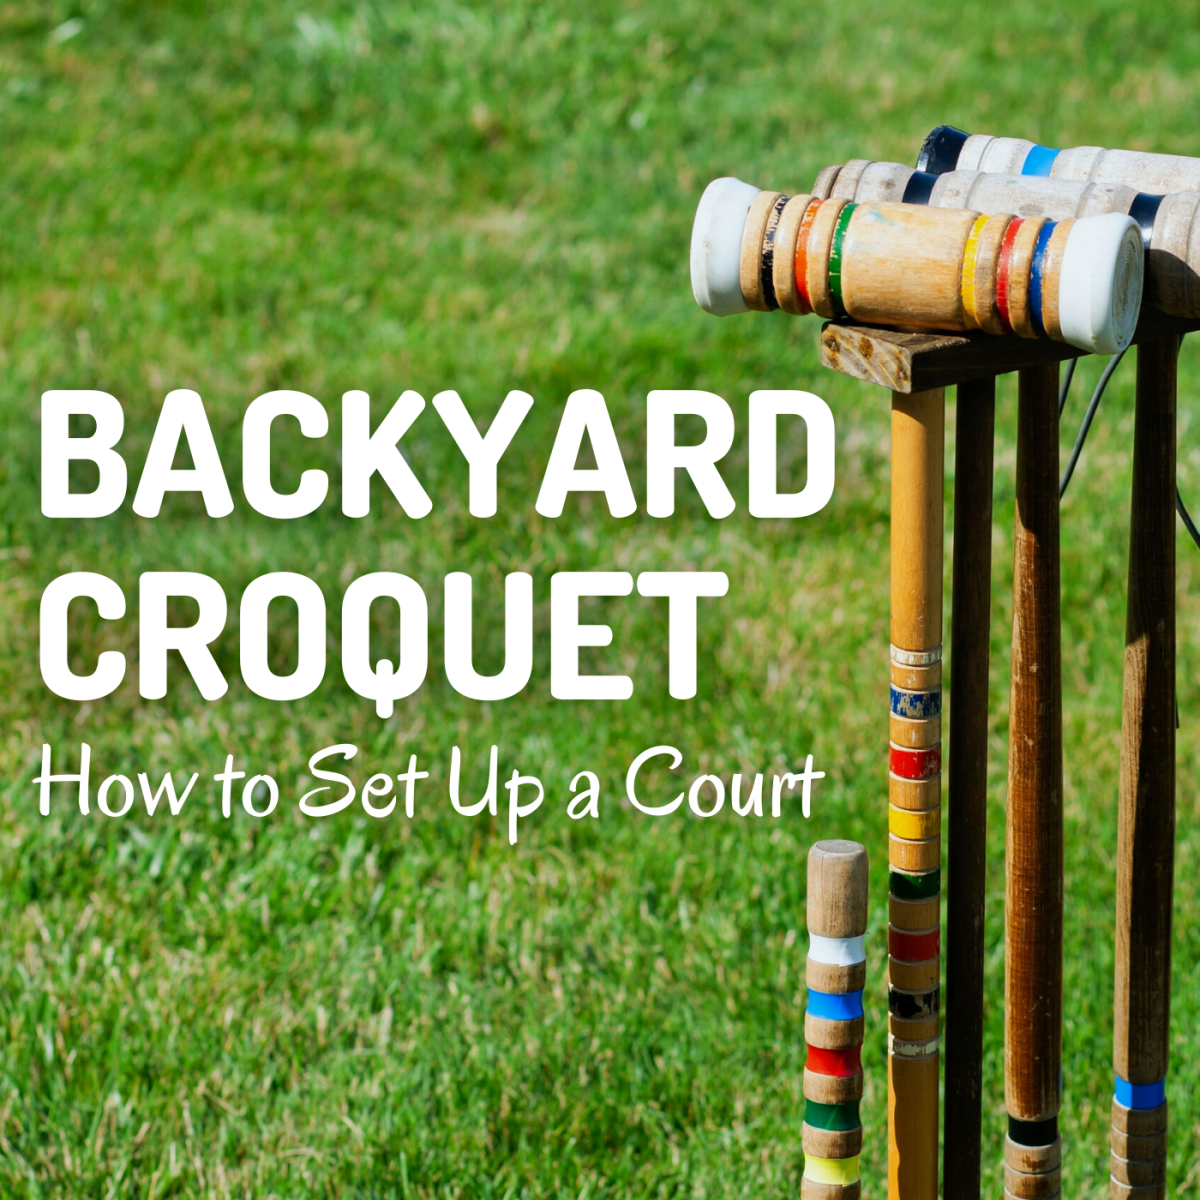 Discover the proper dimensions for a backyard croquet court, also known as a 9-wicket court.